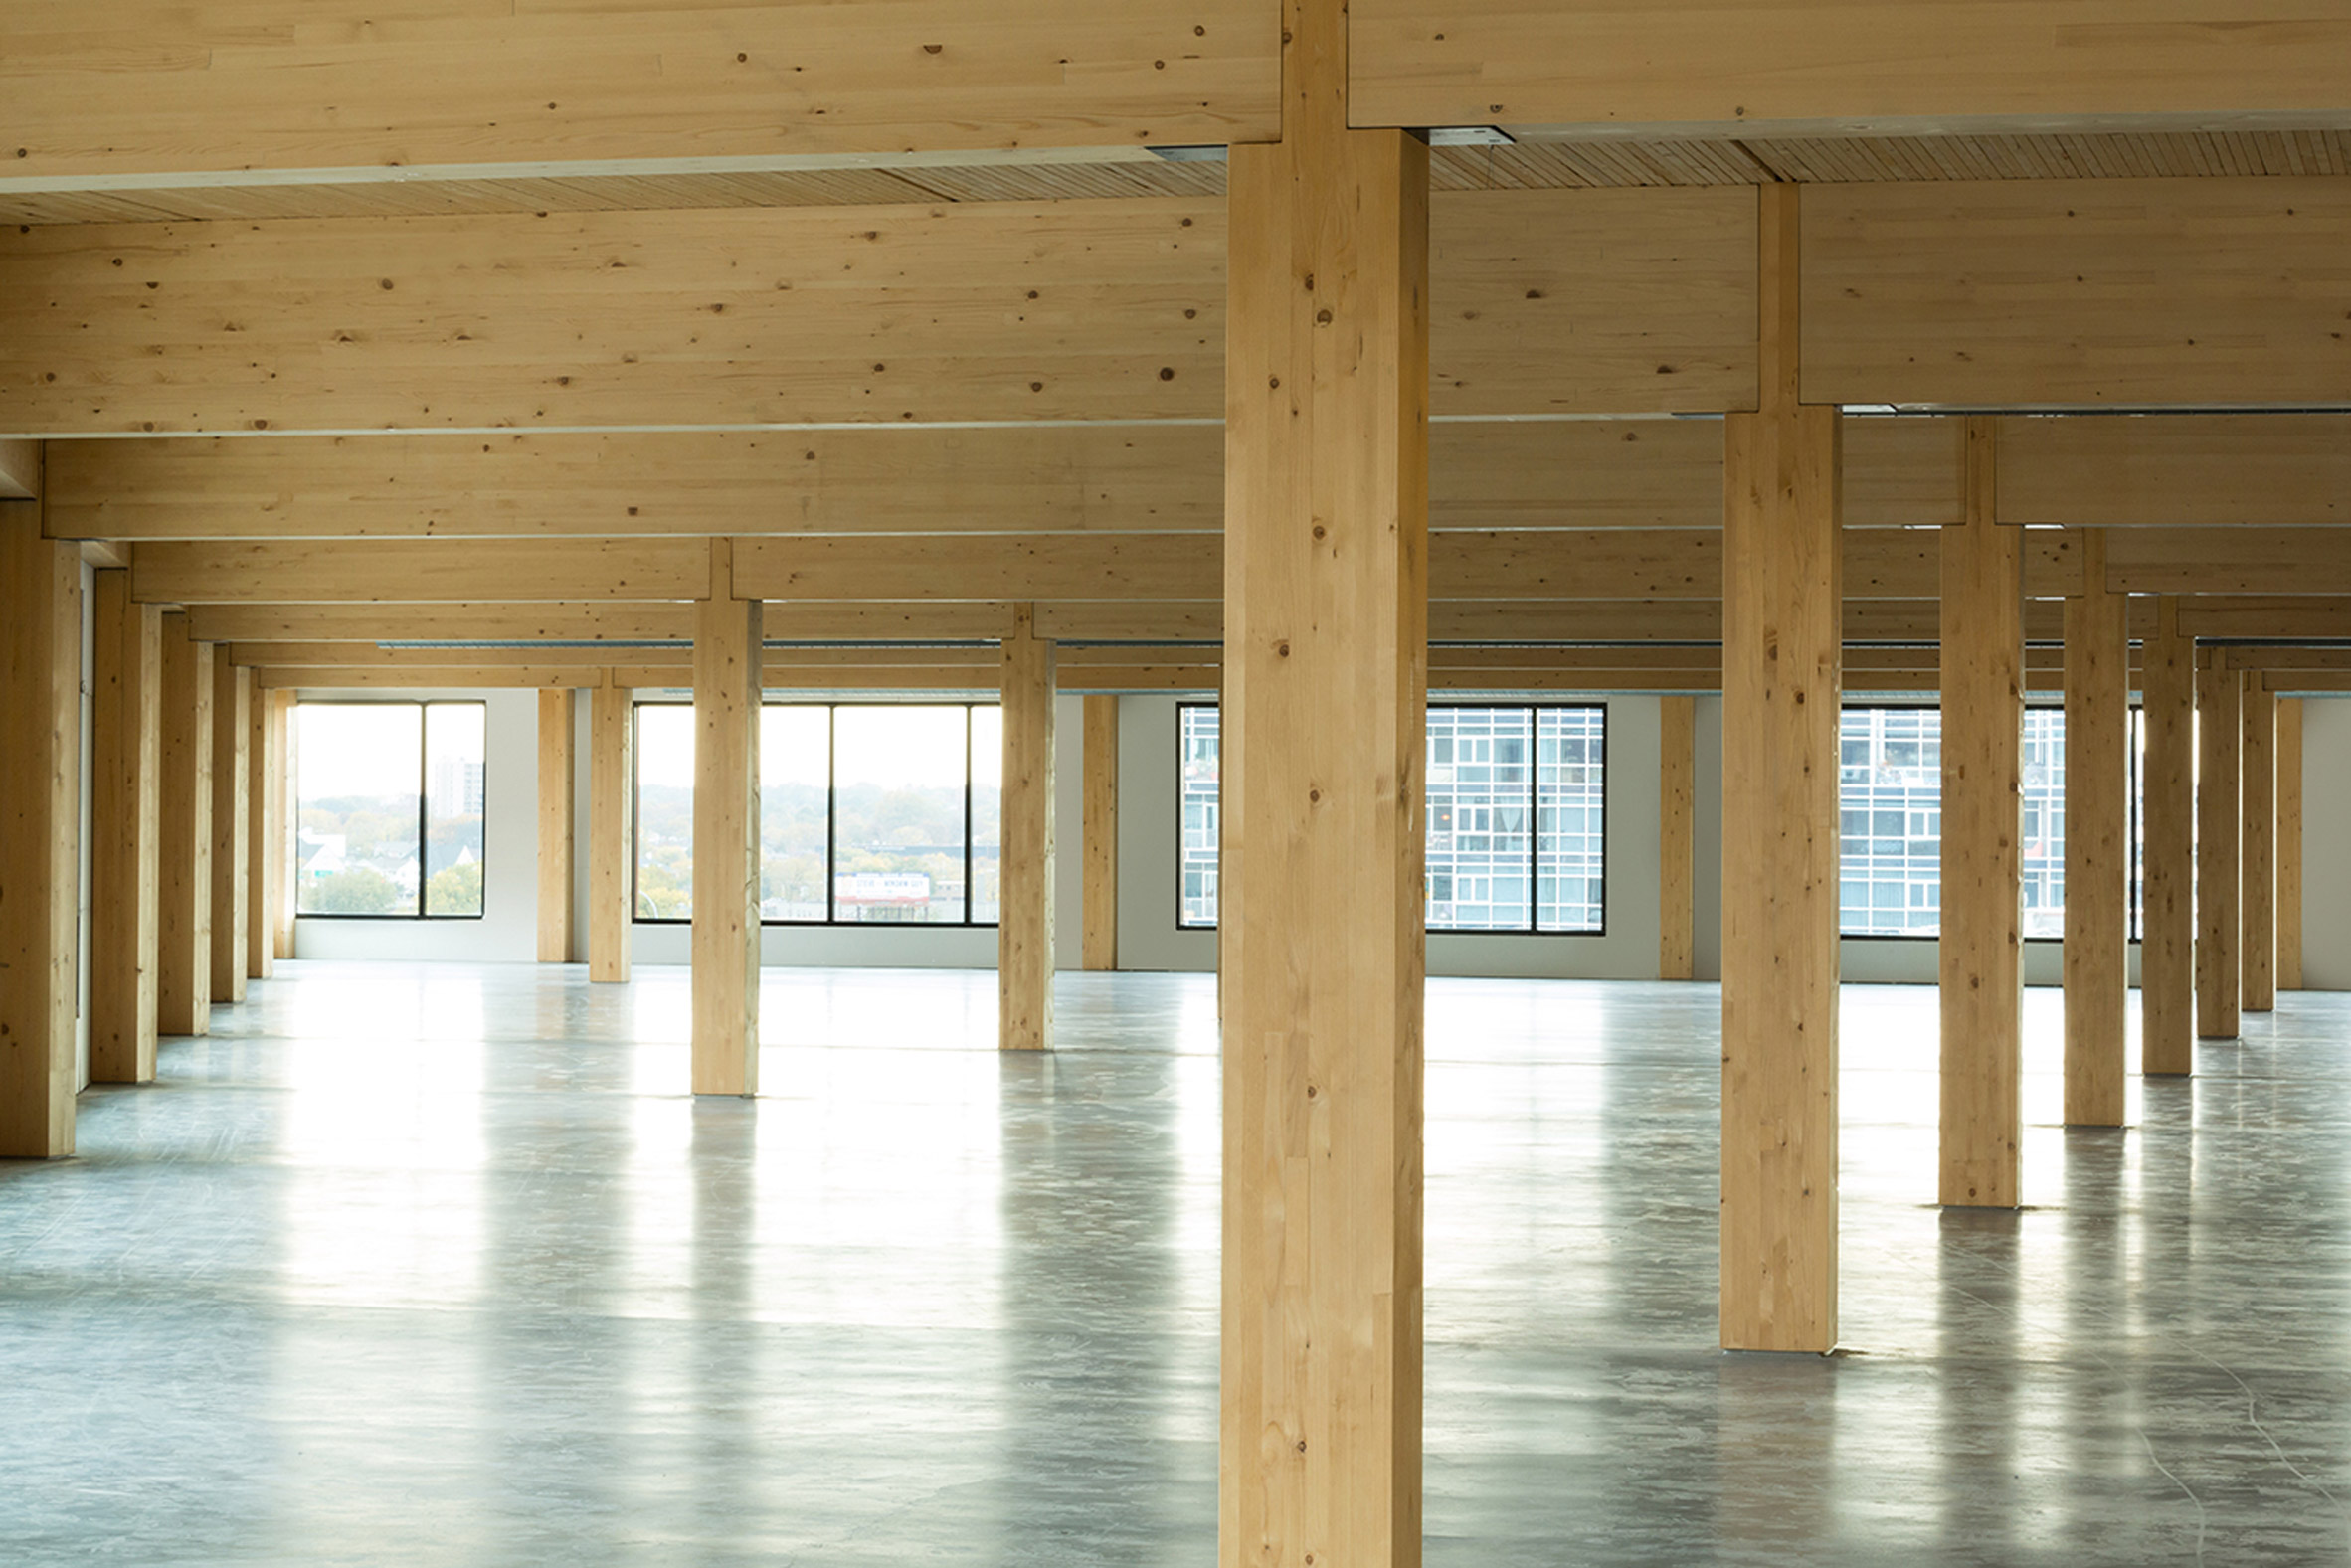 Interior of an empty office space with concrete floors and mass timber columns and beams